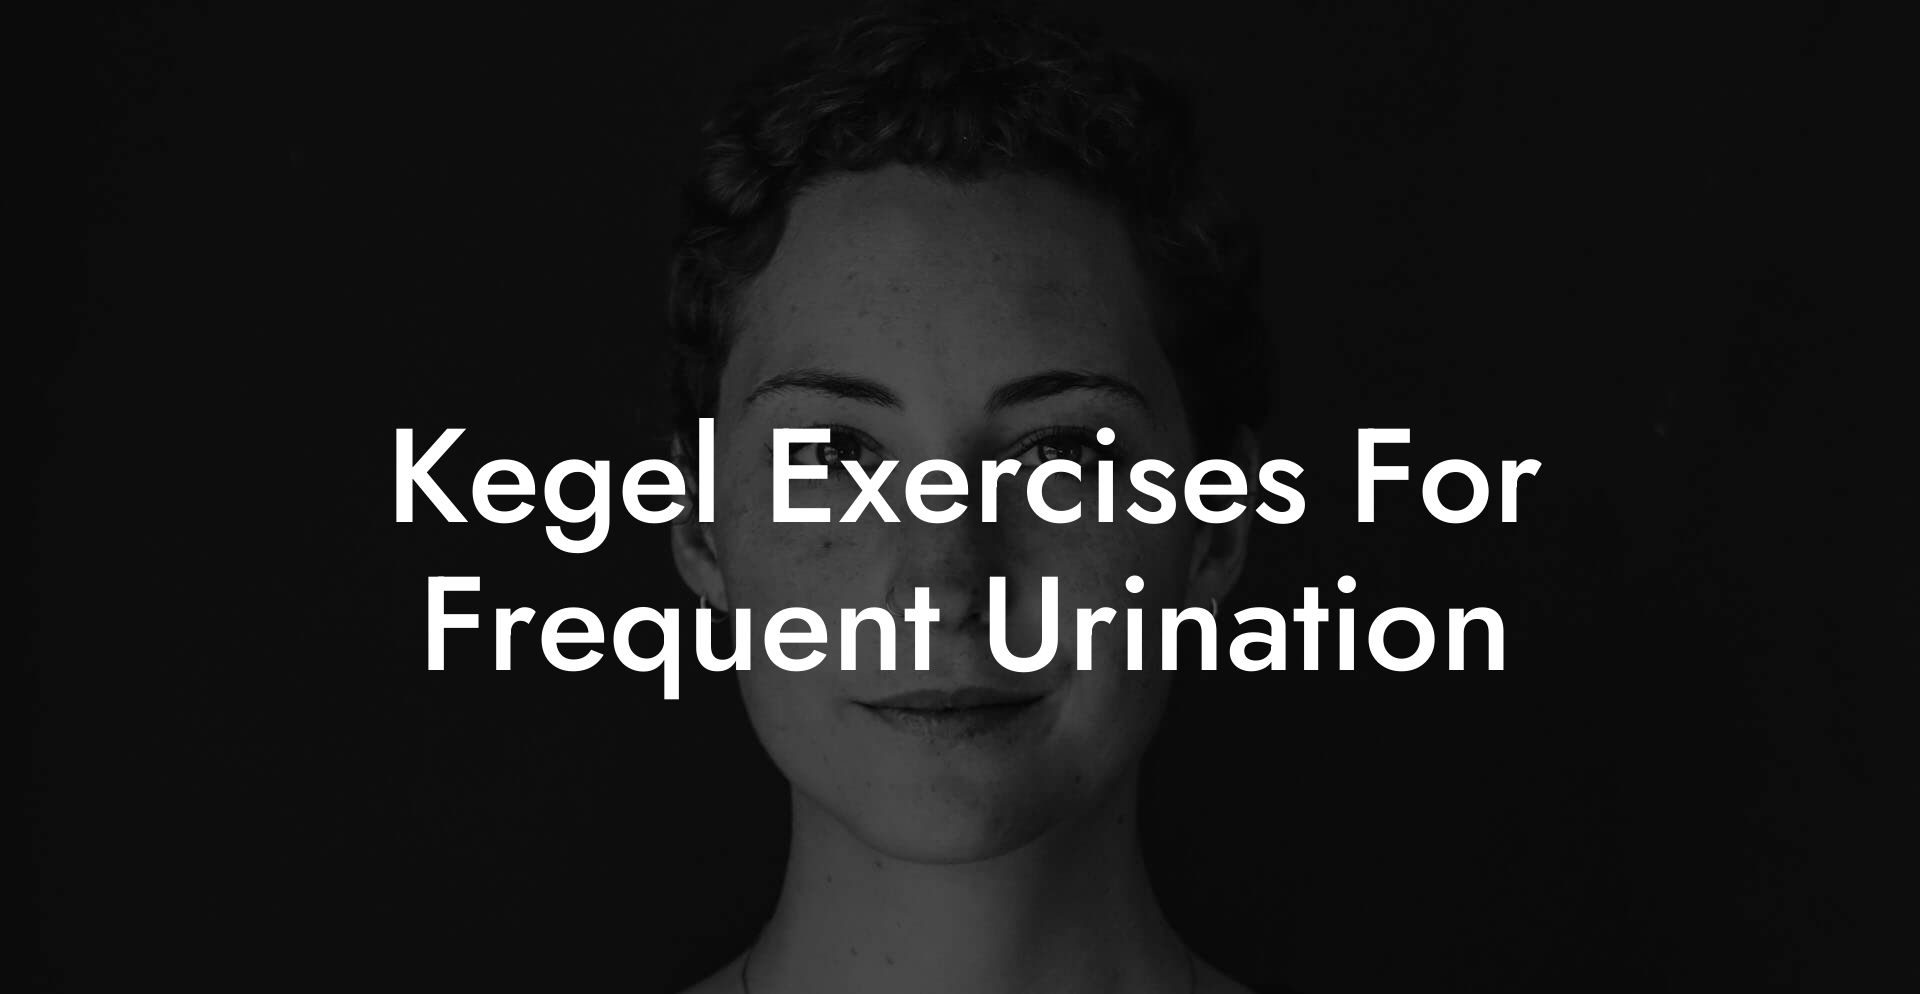 Kegel Exercises For Frequent Urination